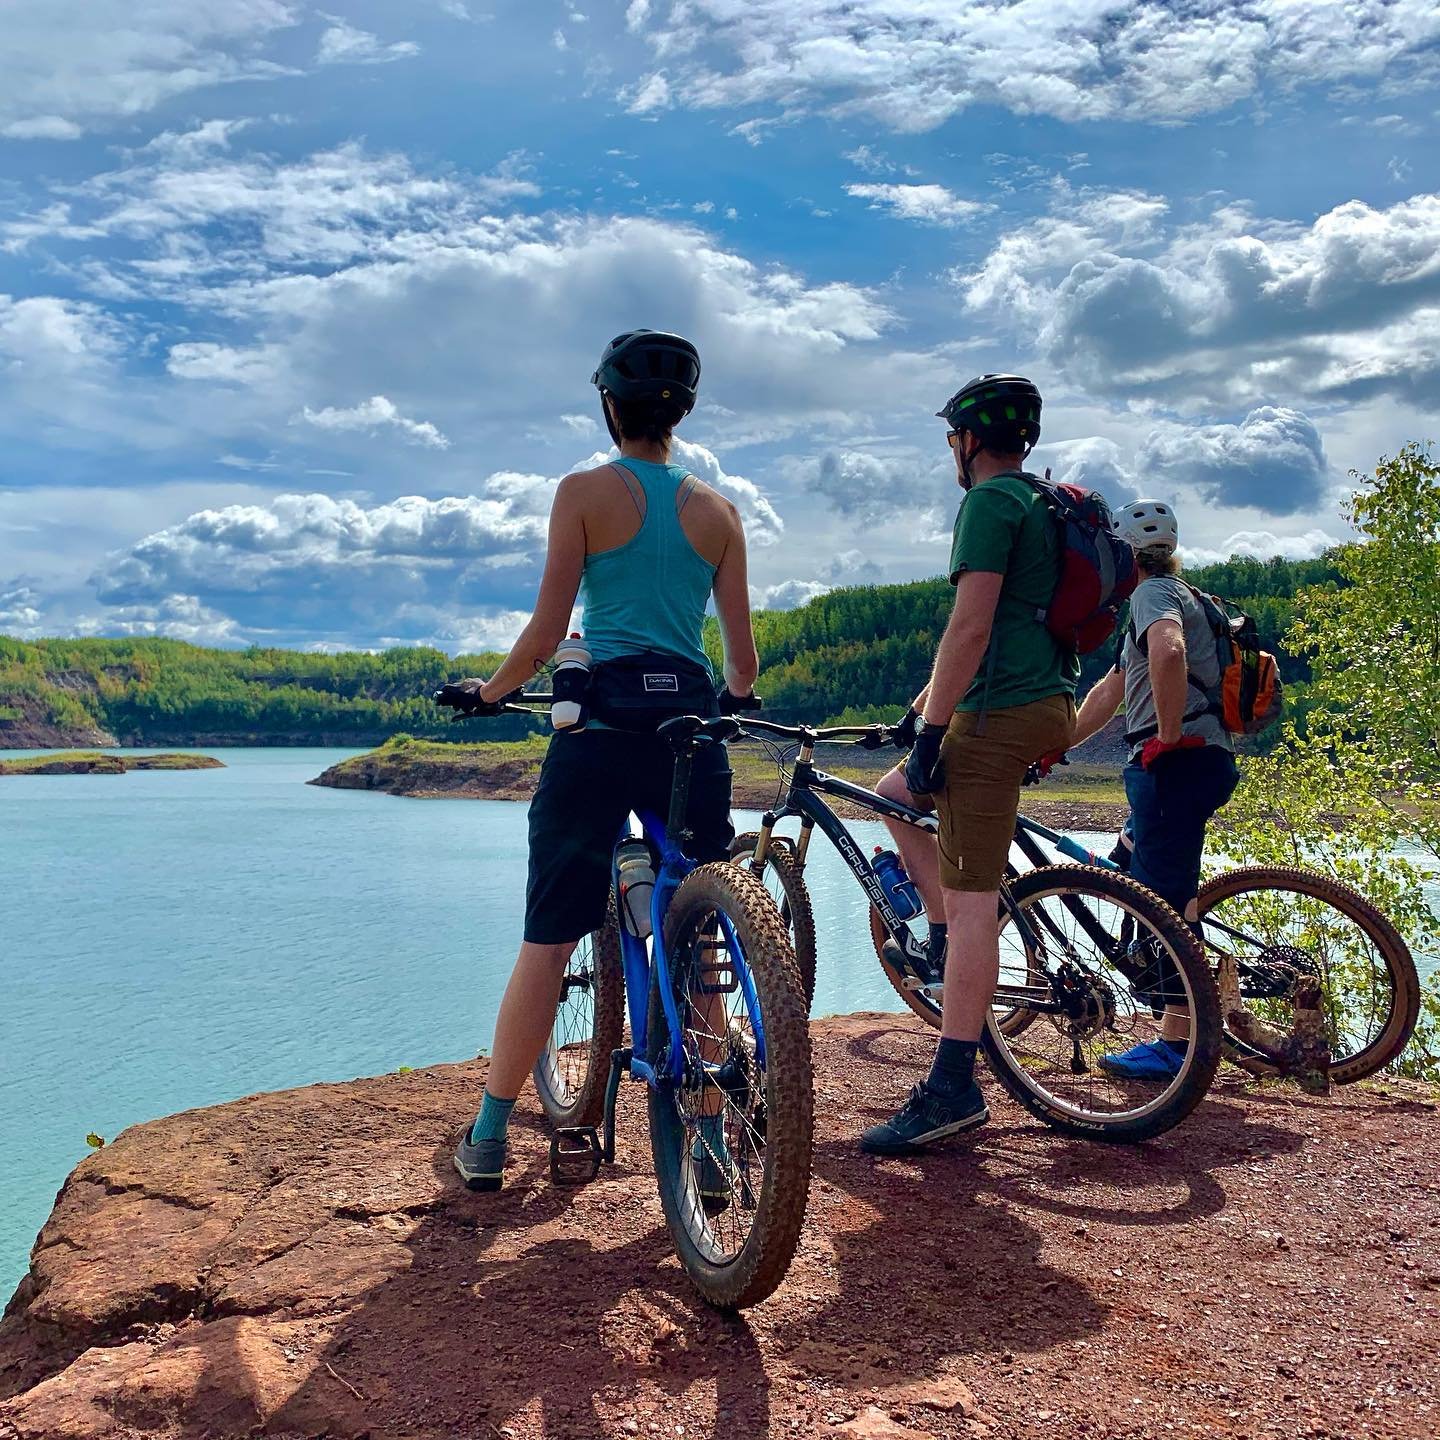 In case you&rsquo;re still on the fence about committing to a trip to Redhead this summer&hellip;.It&rsquo;s time to take the plunge &hellip;.#pitplunge #mtbtrail #RedheadMTBPark #chisholmmn #RideTheRange #Minnesota #mtb #mn #mnmtb #bike #views